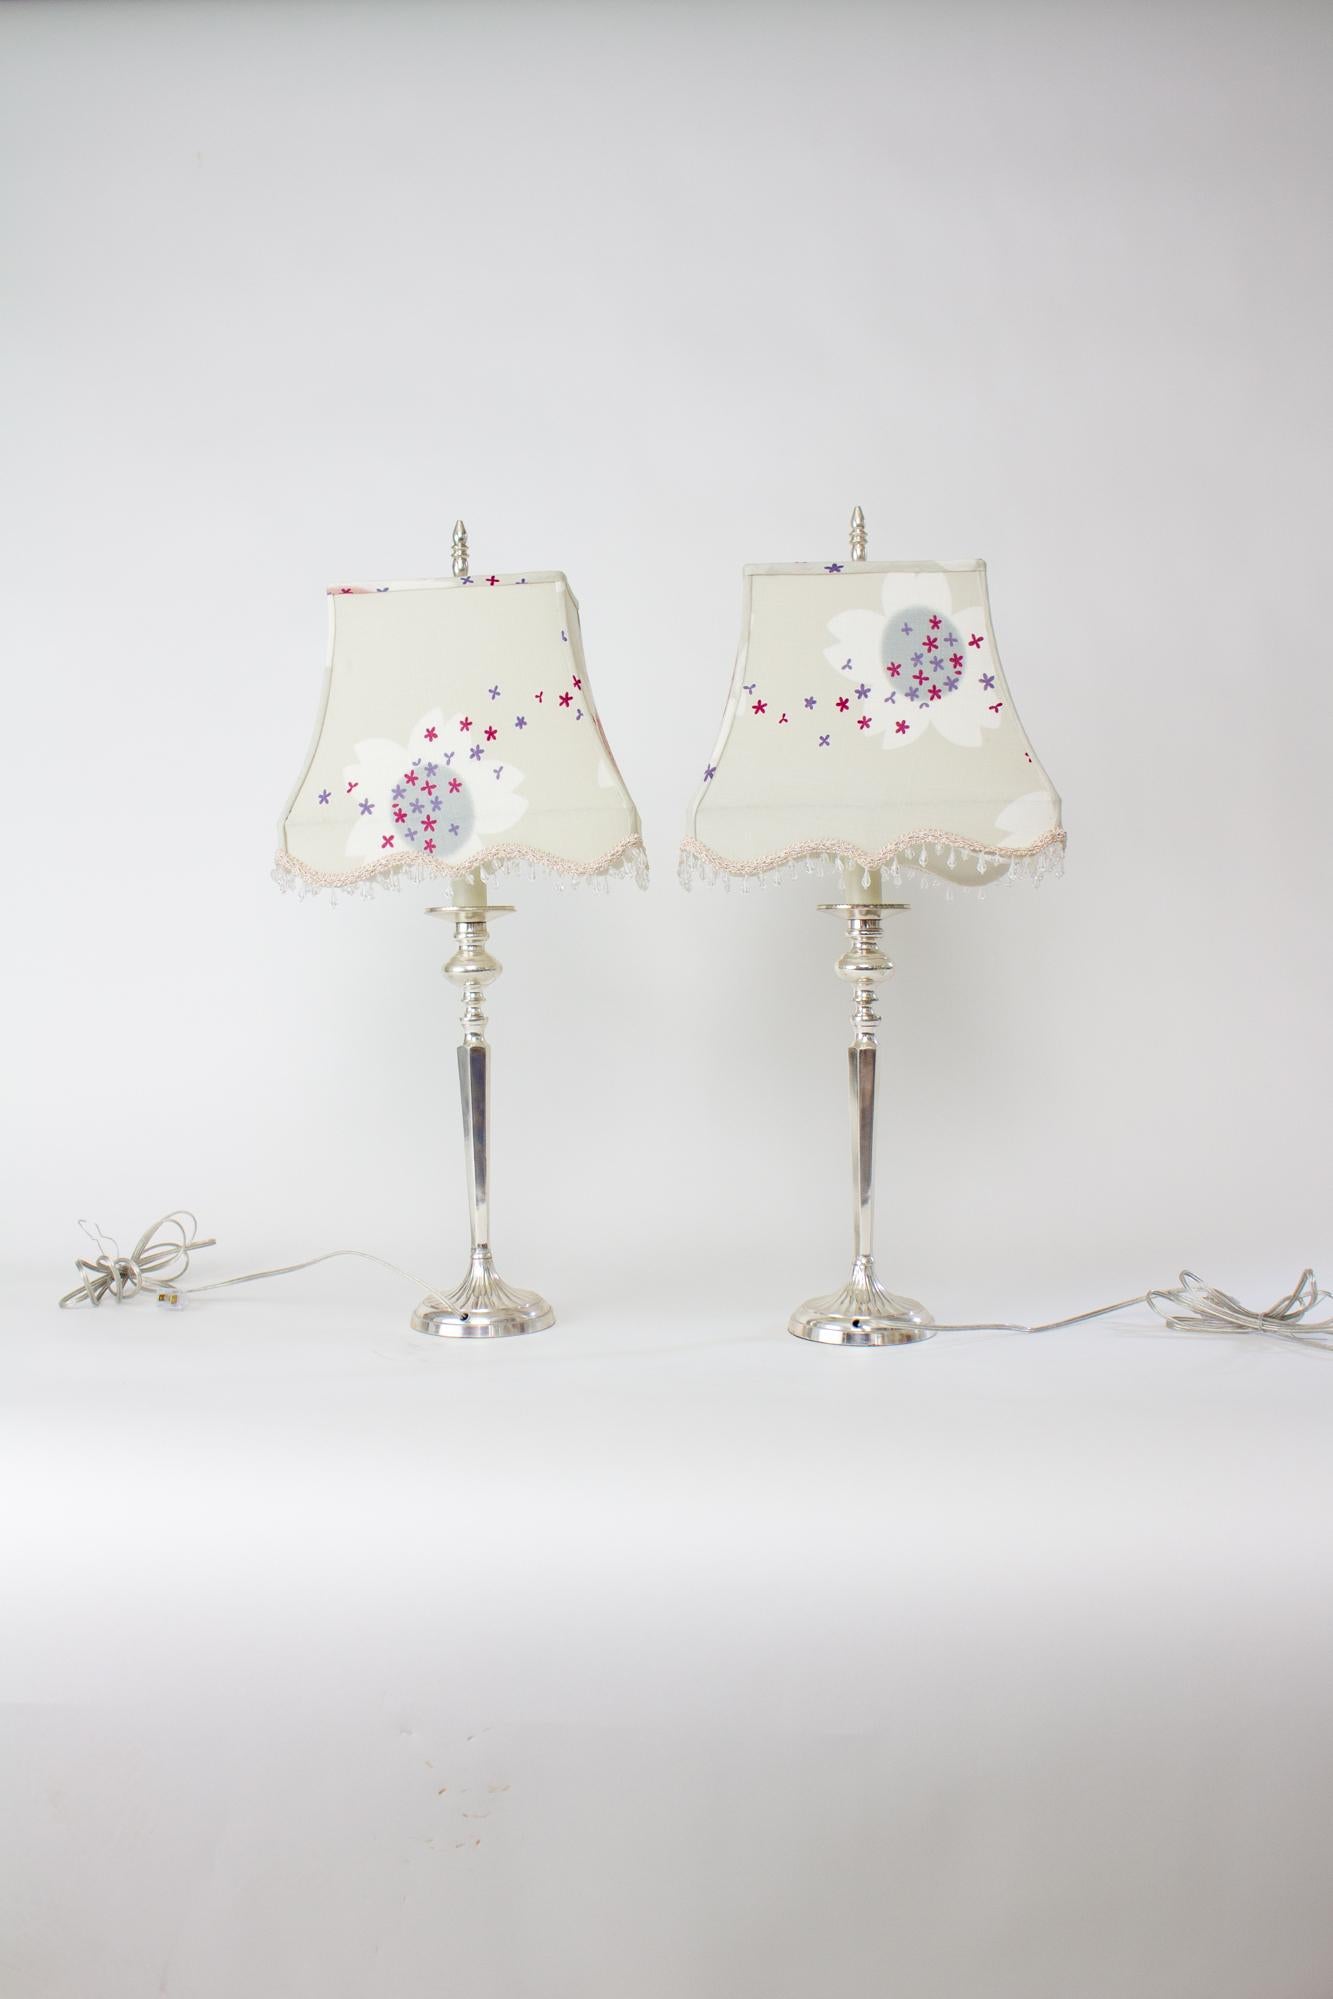 Pair of Silver Table Lamps with Custom Yukata Lampshades In Excellent Condition For Sale In Canton, MA